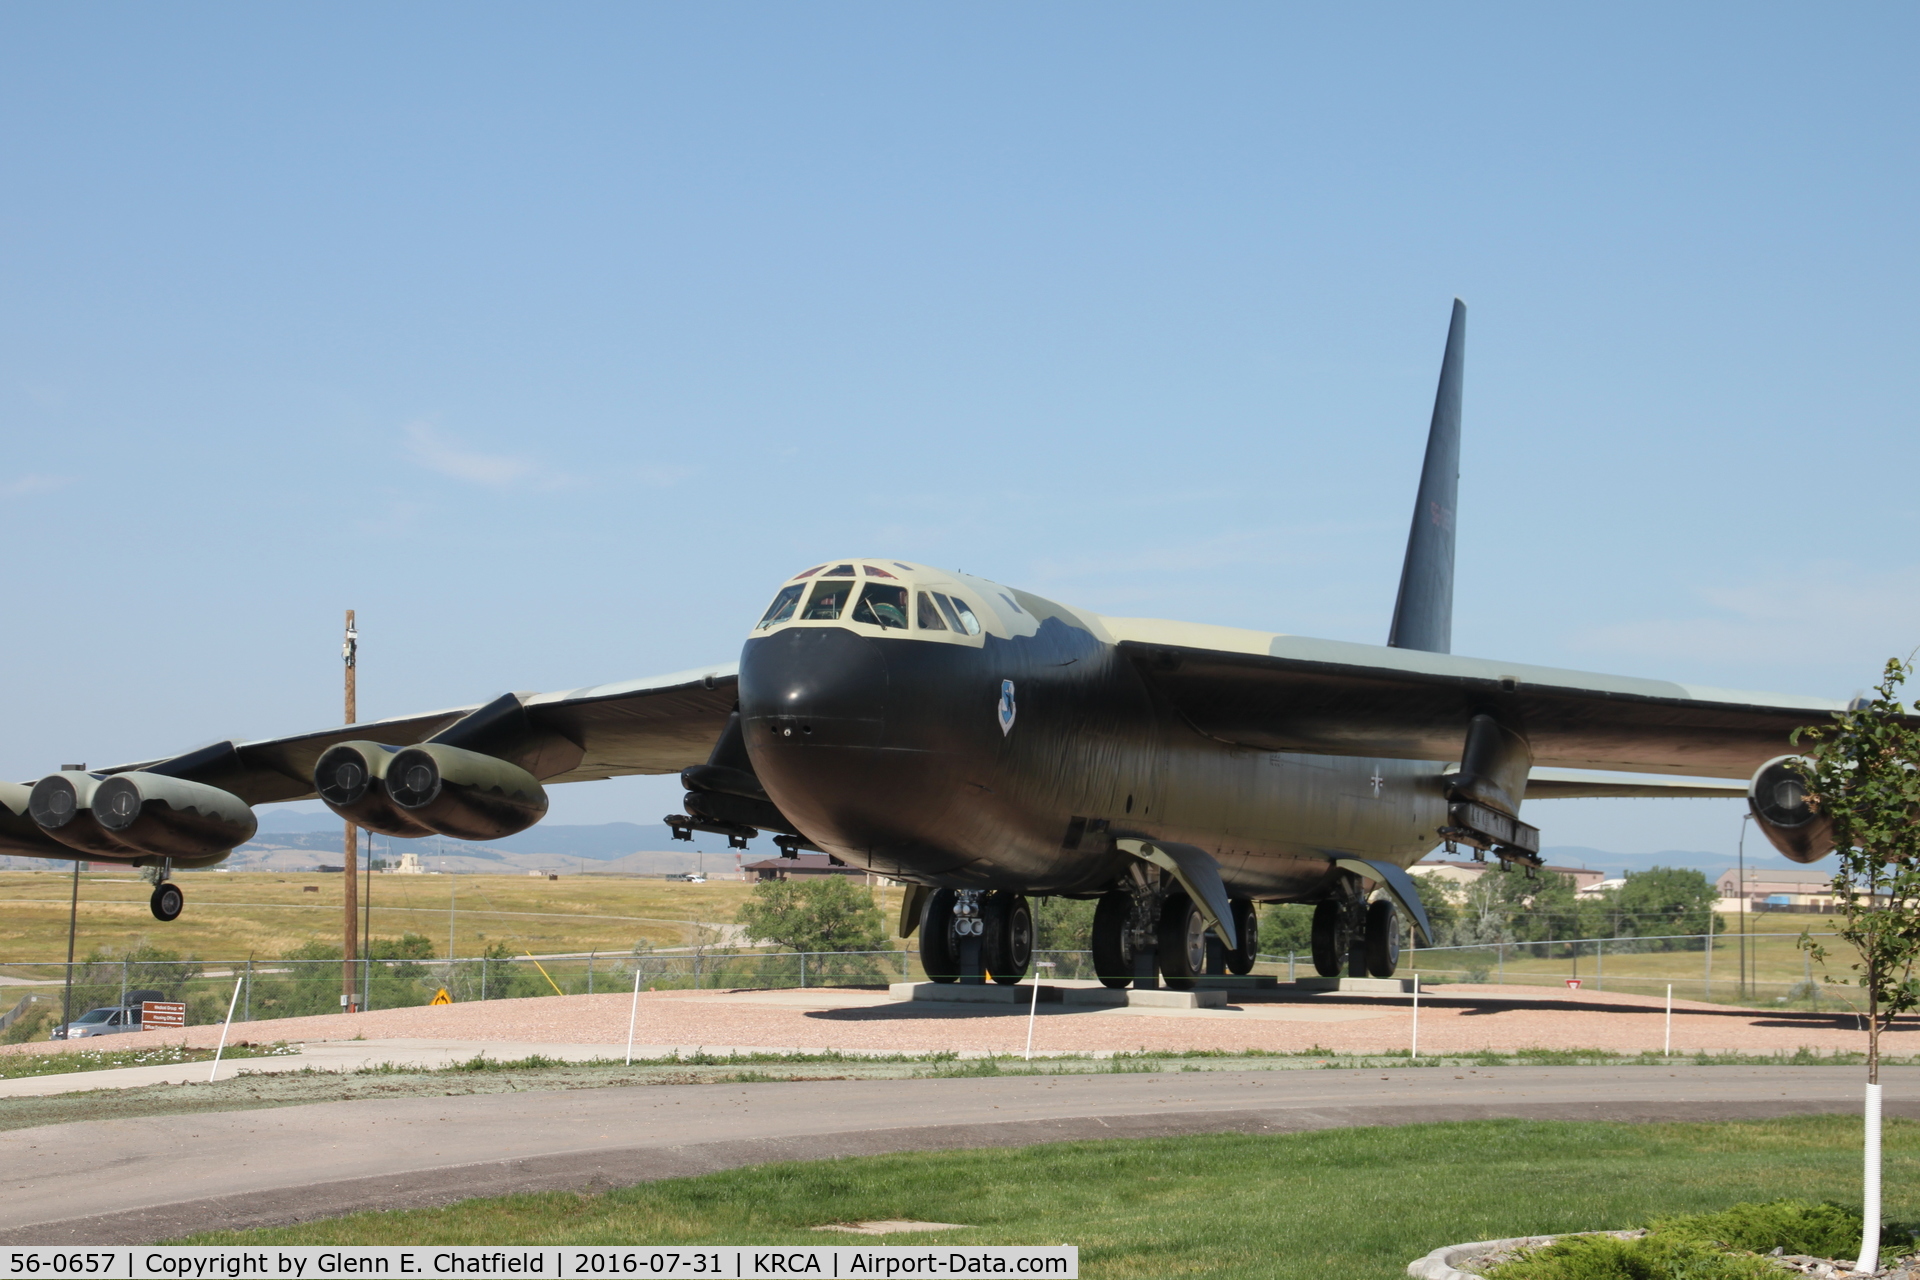 56-0657, 1956 Boeing B-52D-30-BW Stratofortress C/N 464028, At the South Dakota Air & Space Museum